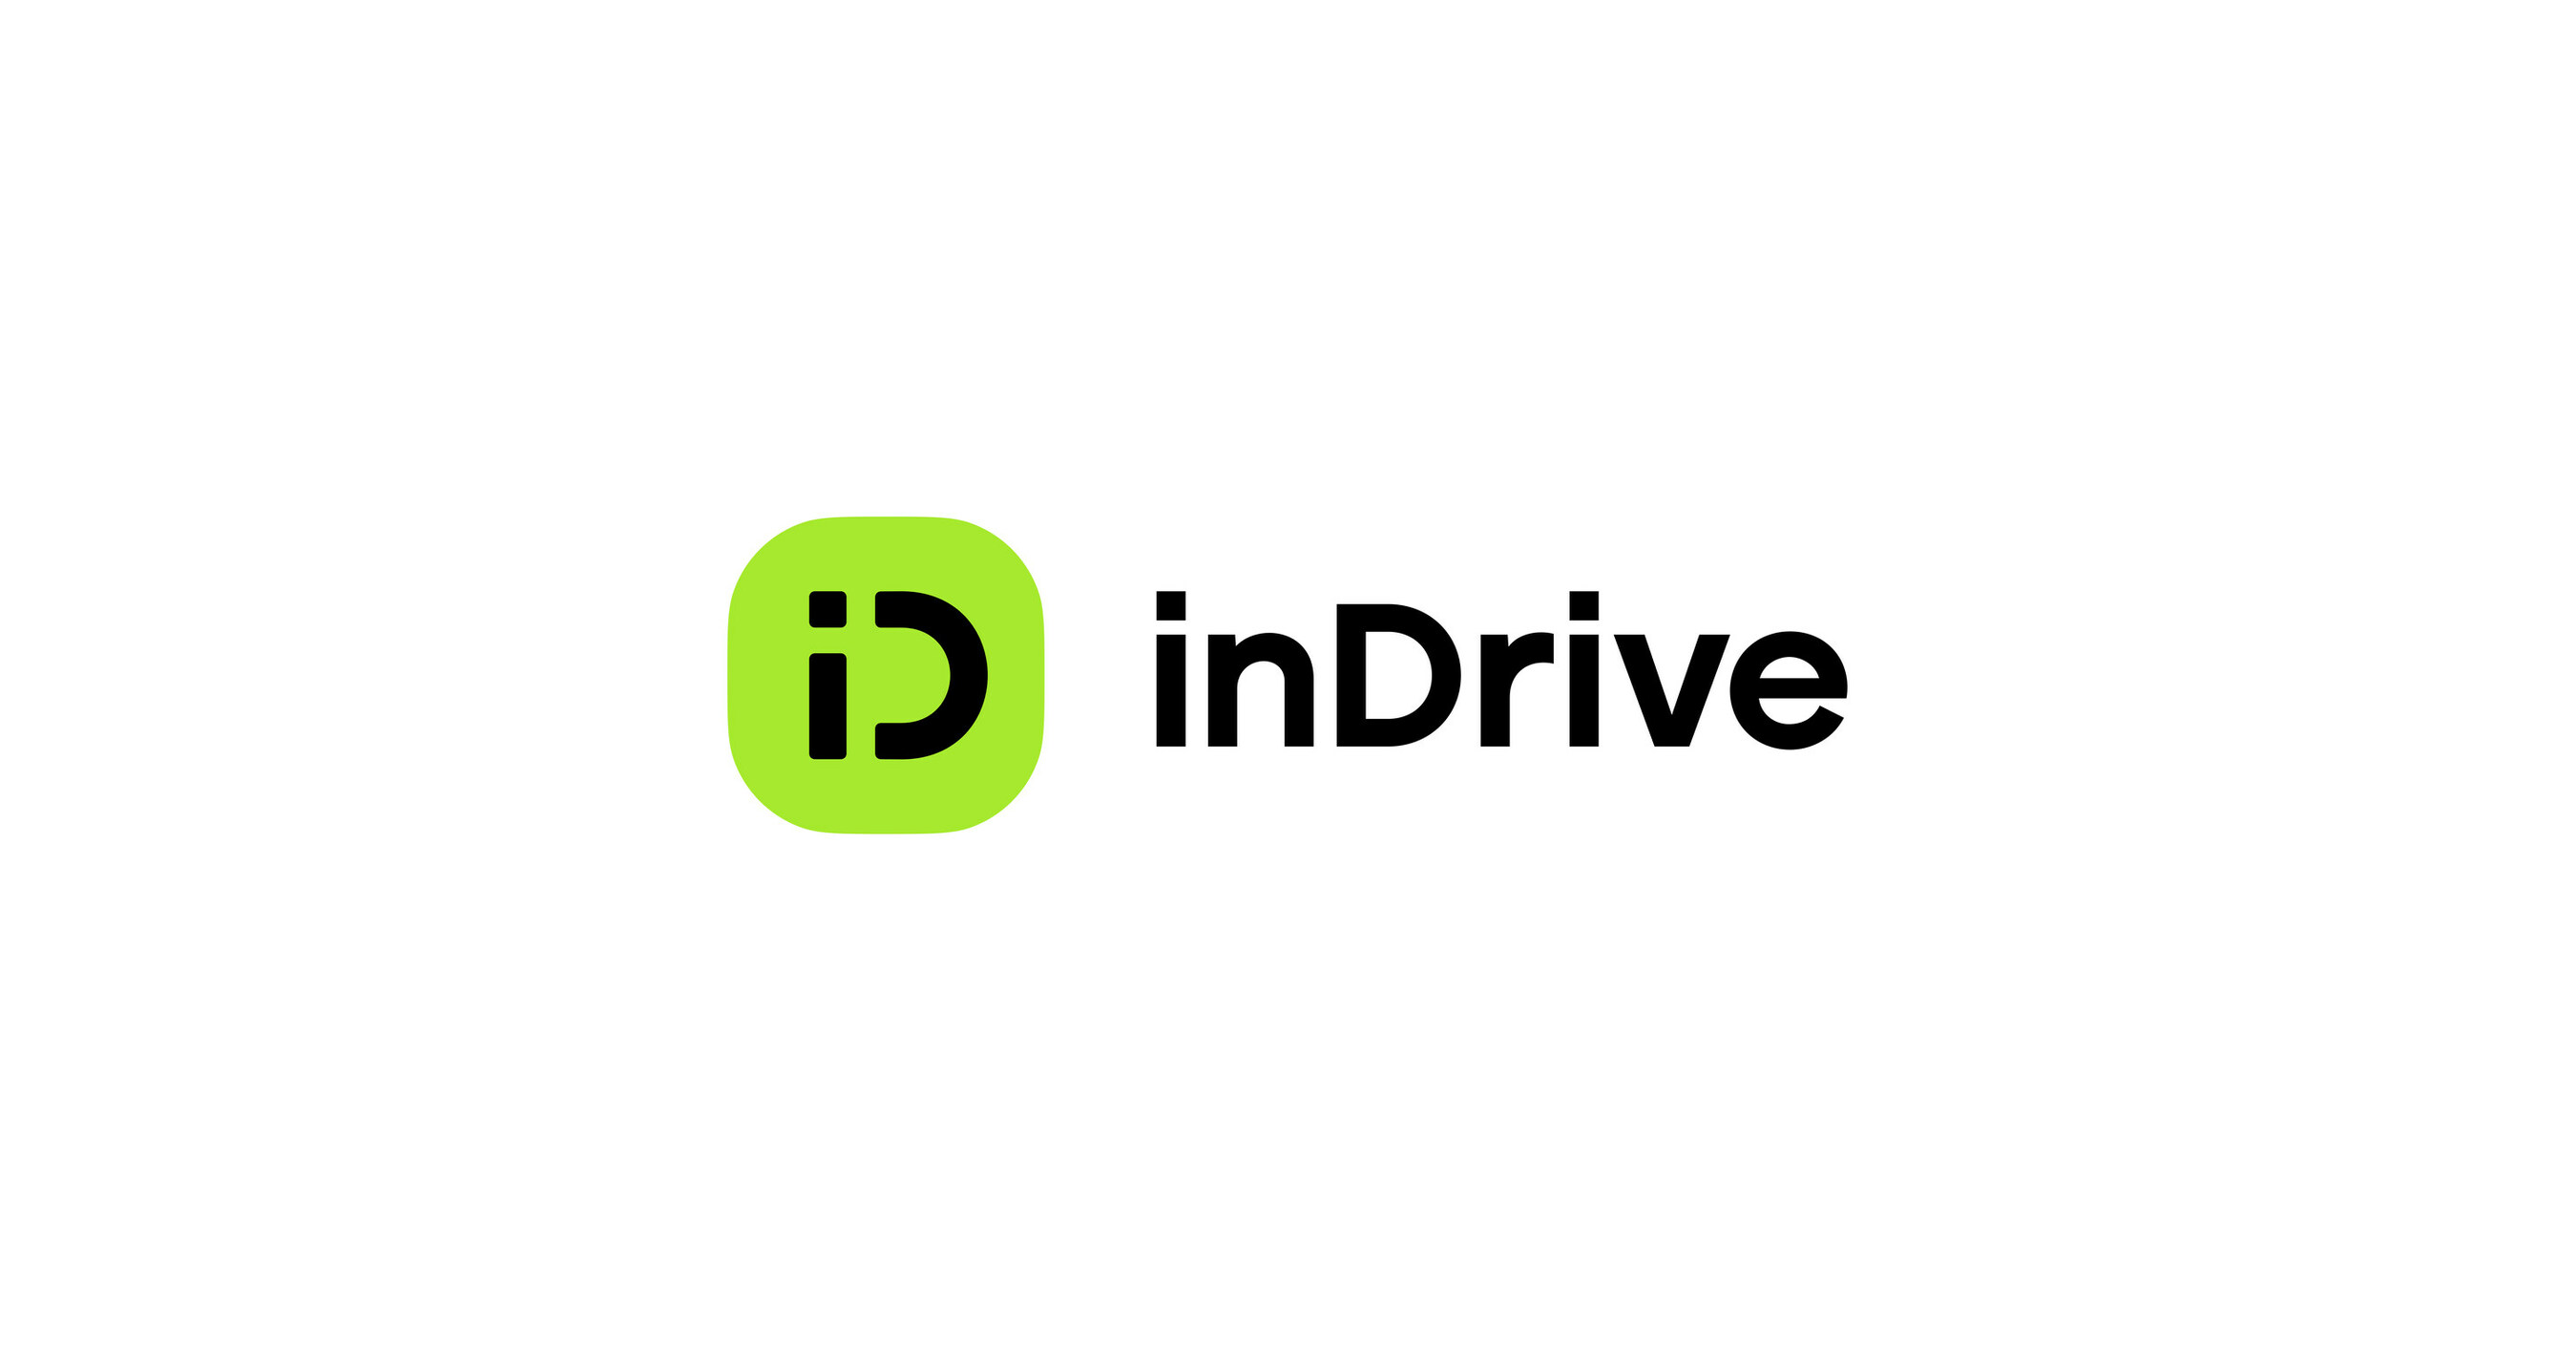 Support indrive com. INDRIVE. Райд Интернешнл.